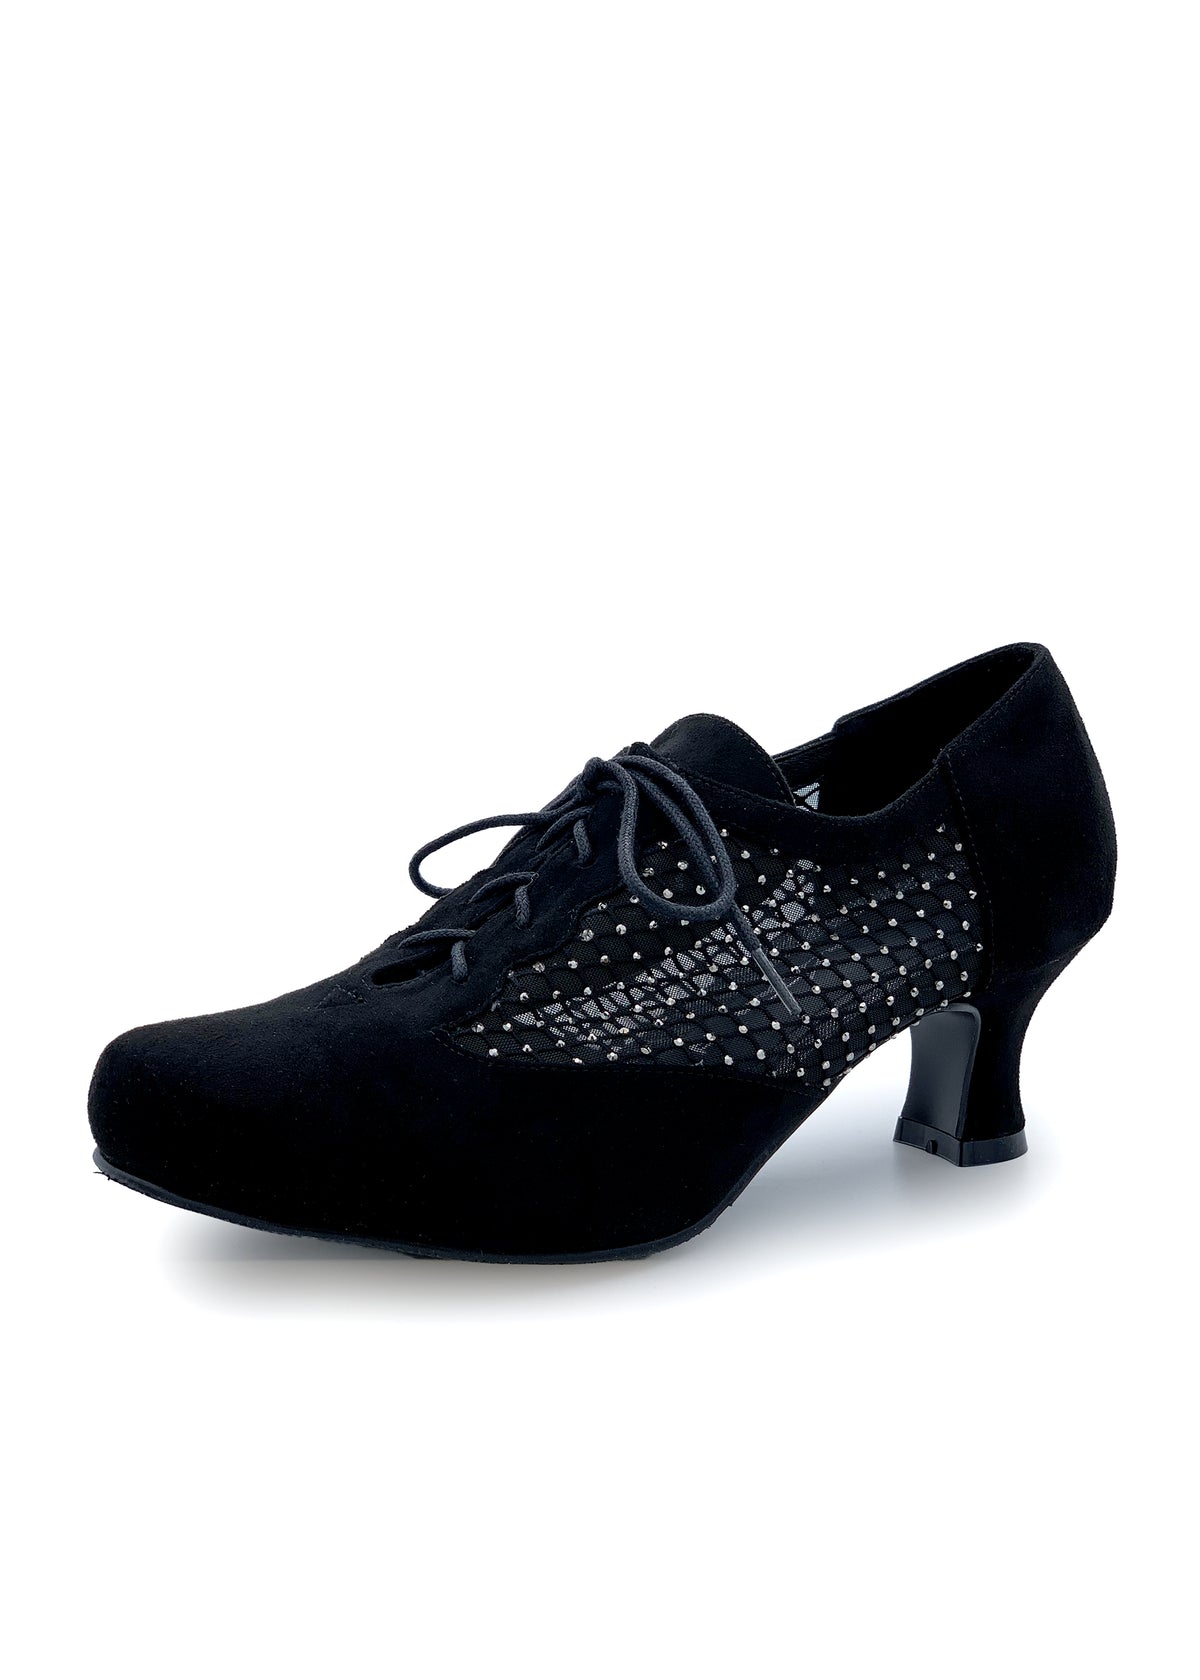 Party Walking shoes - black fabric, diamond mesh on the sides, wide lace